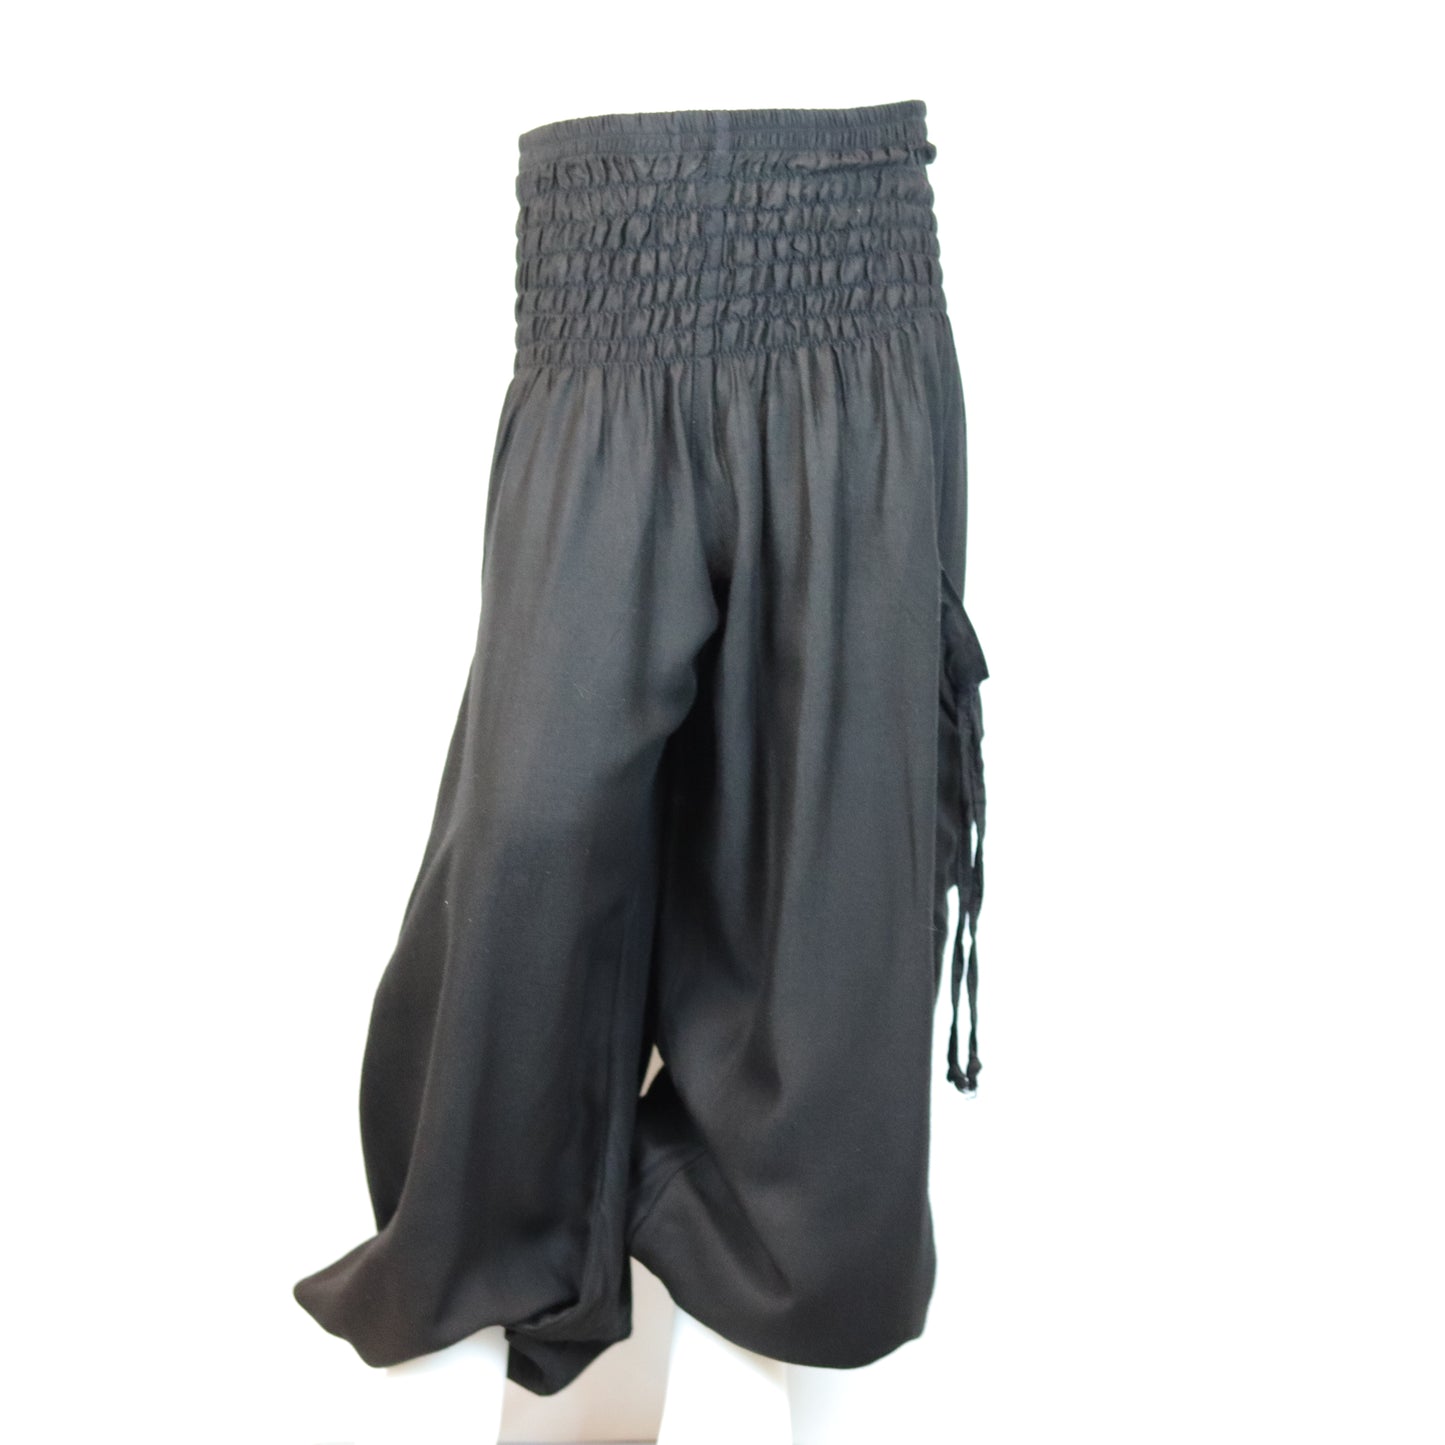 Plain Kids Alibaba Pants Size 3 Three - Fits 2 to 4 Year Olds